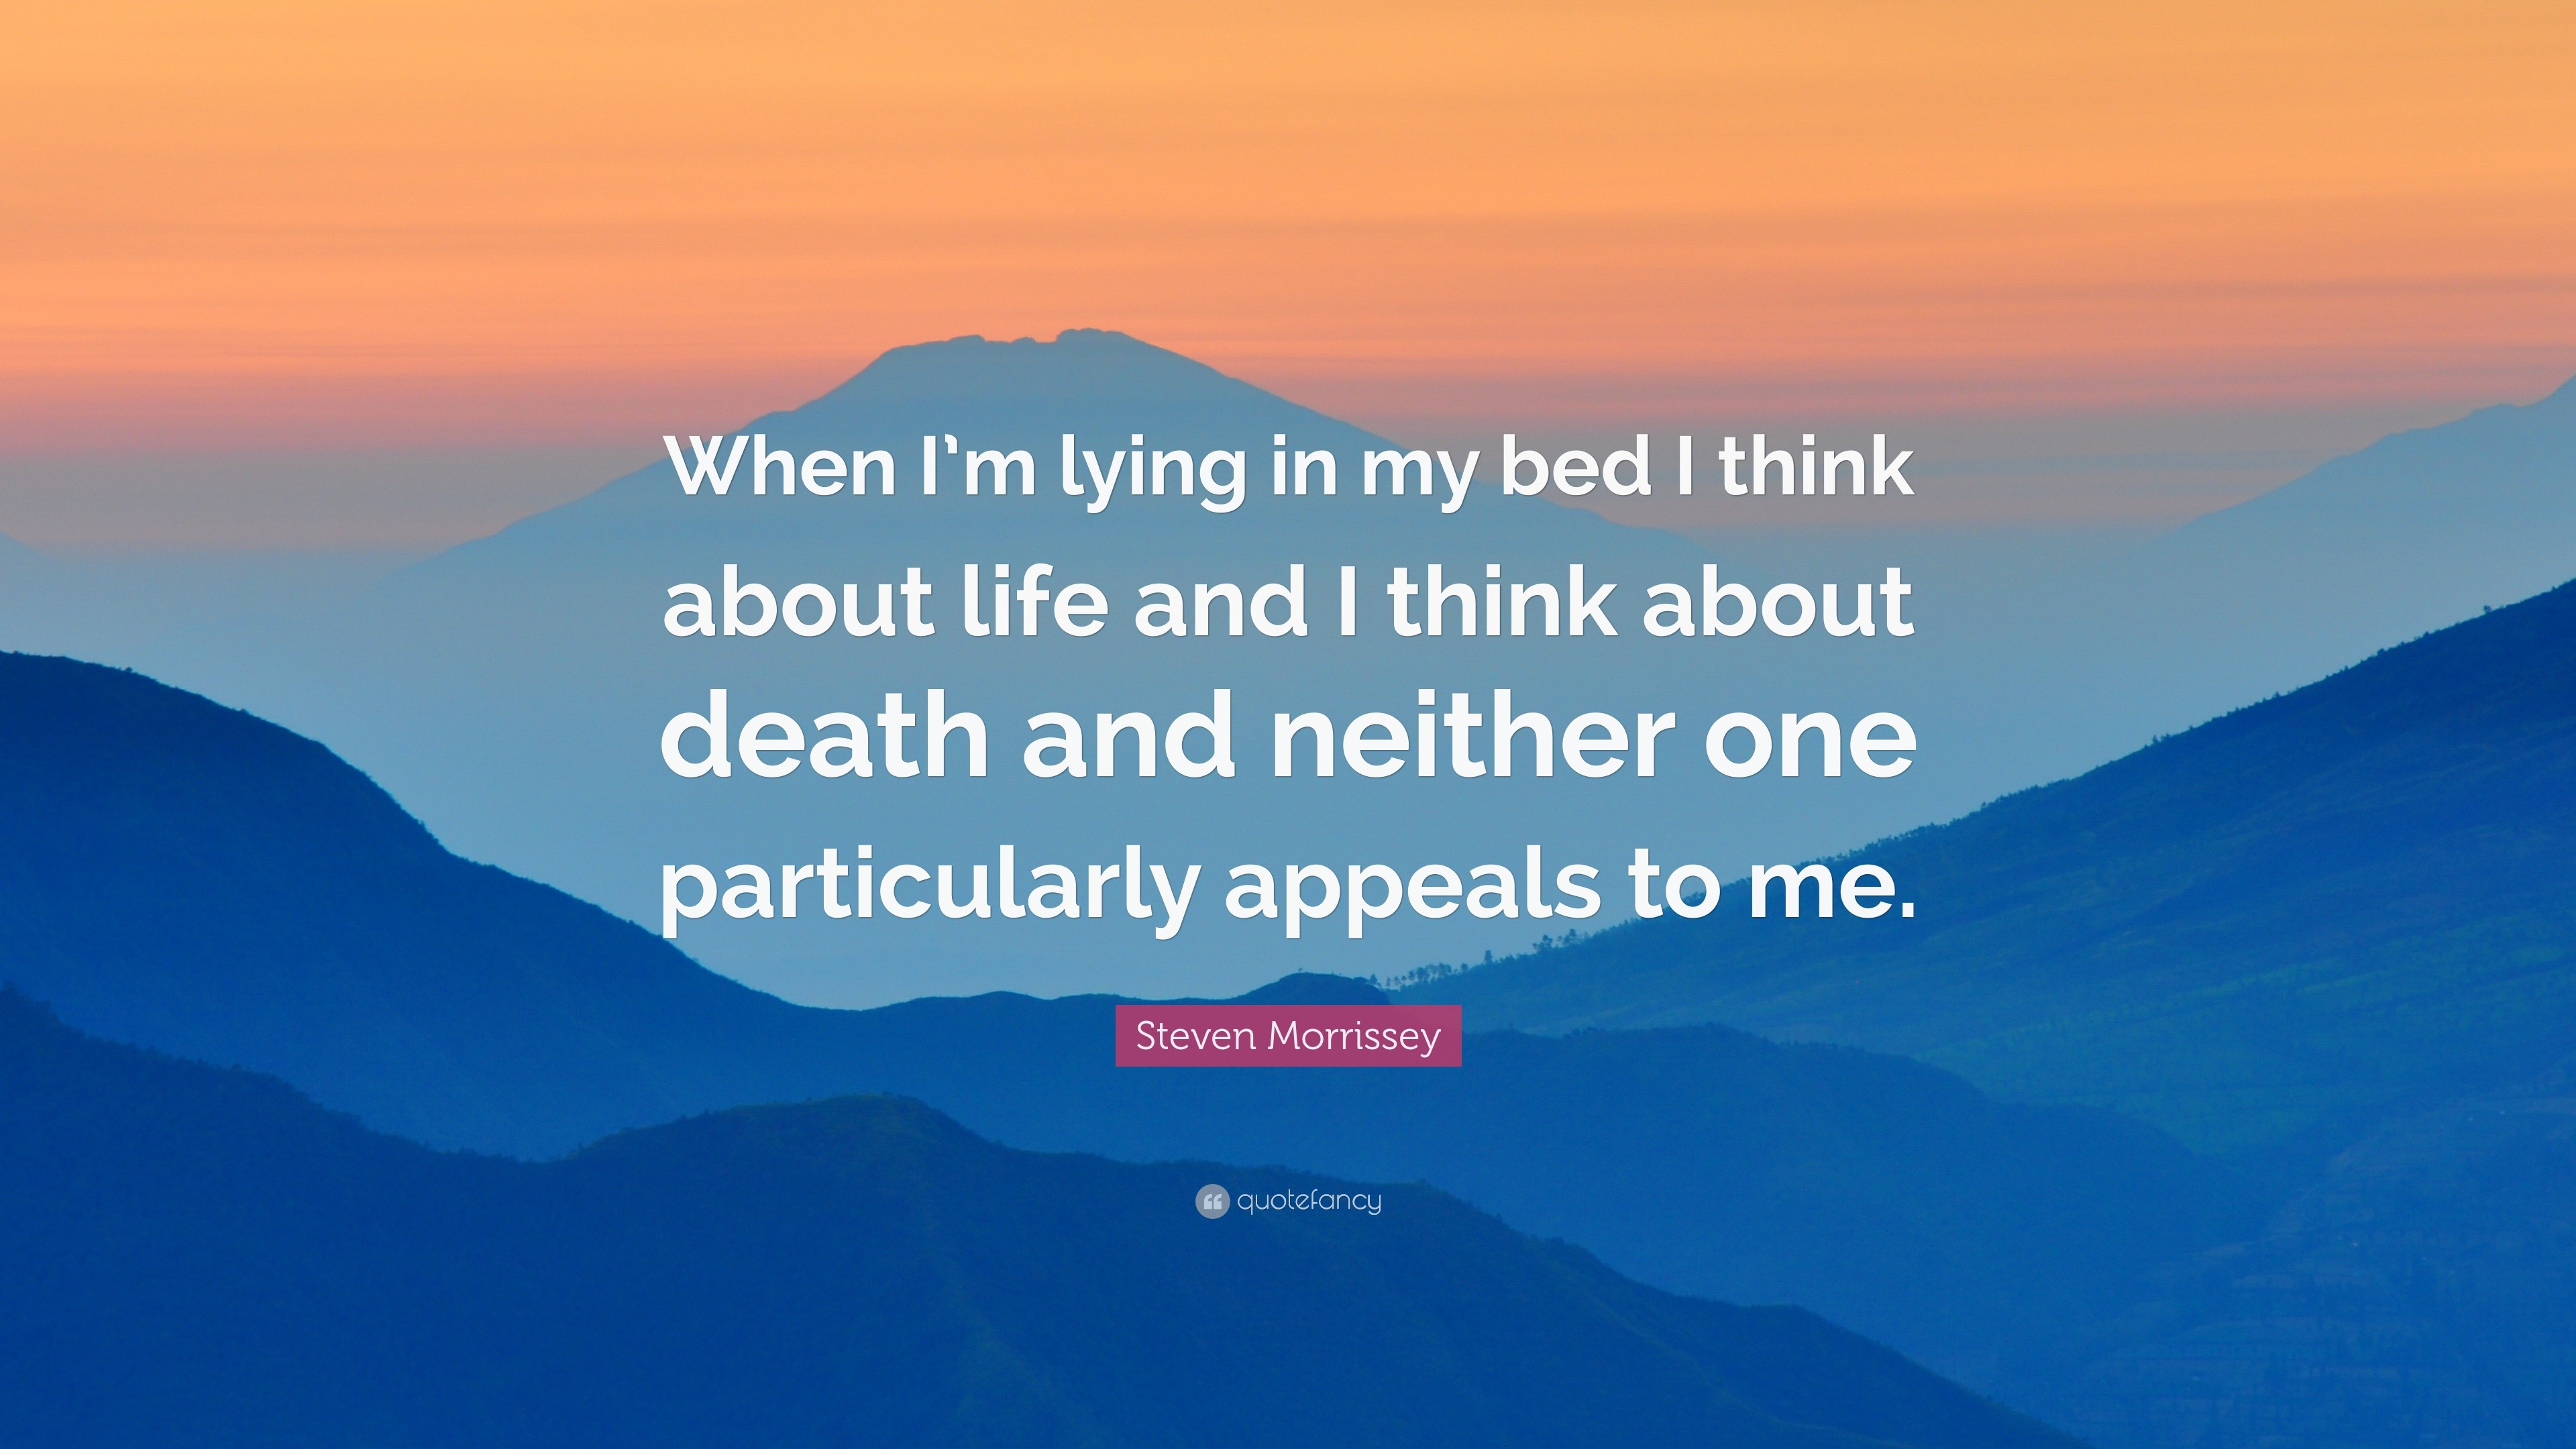 Steven Morrissey Quote: “When I’m lying in my bed I think about life ...